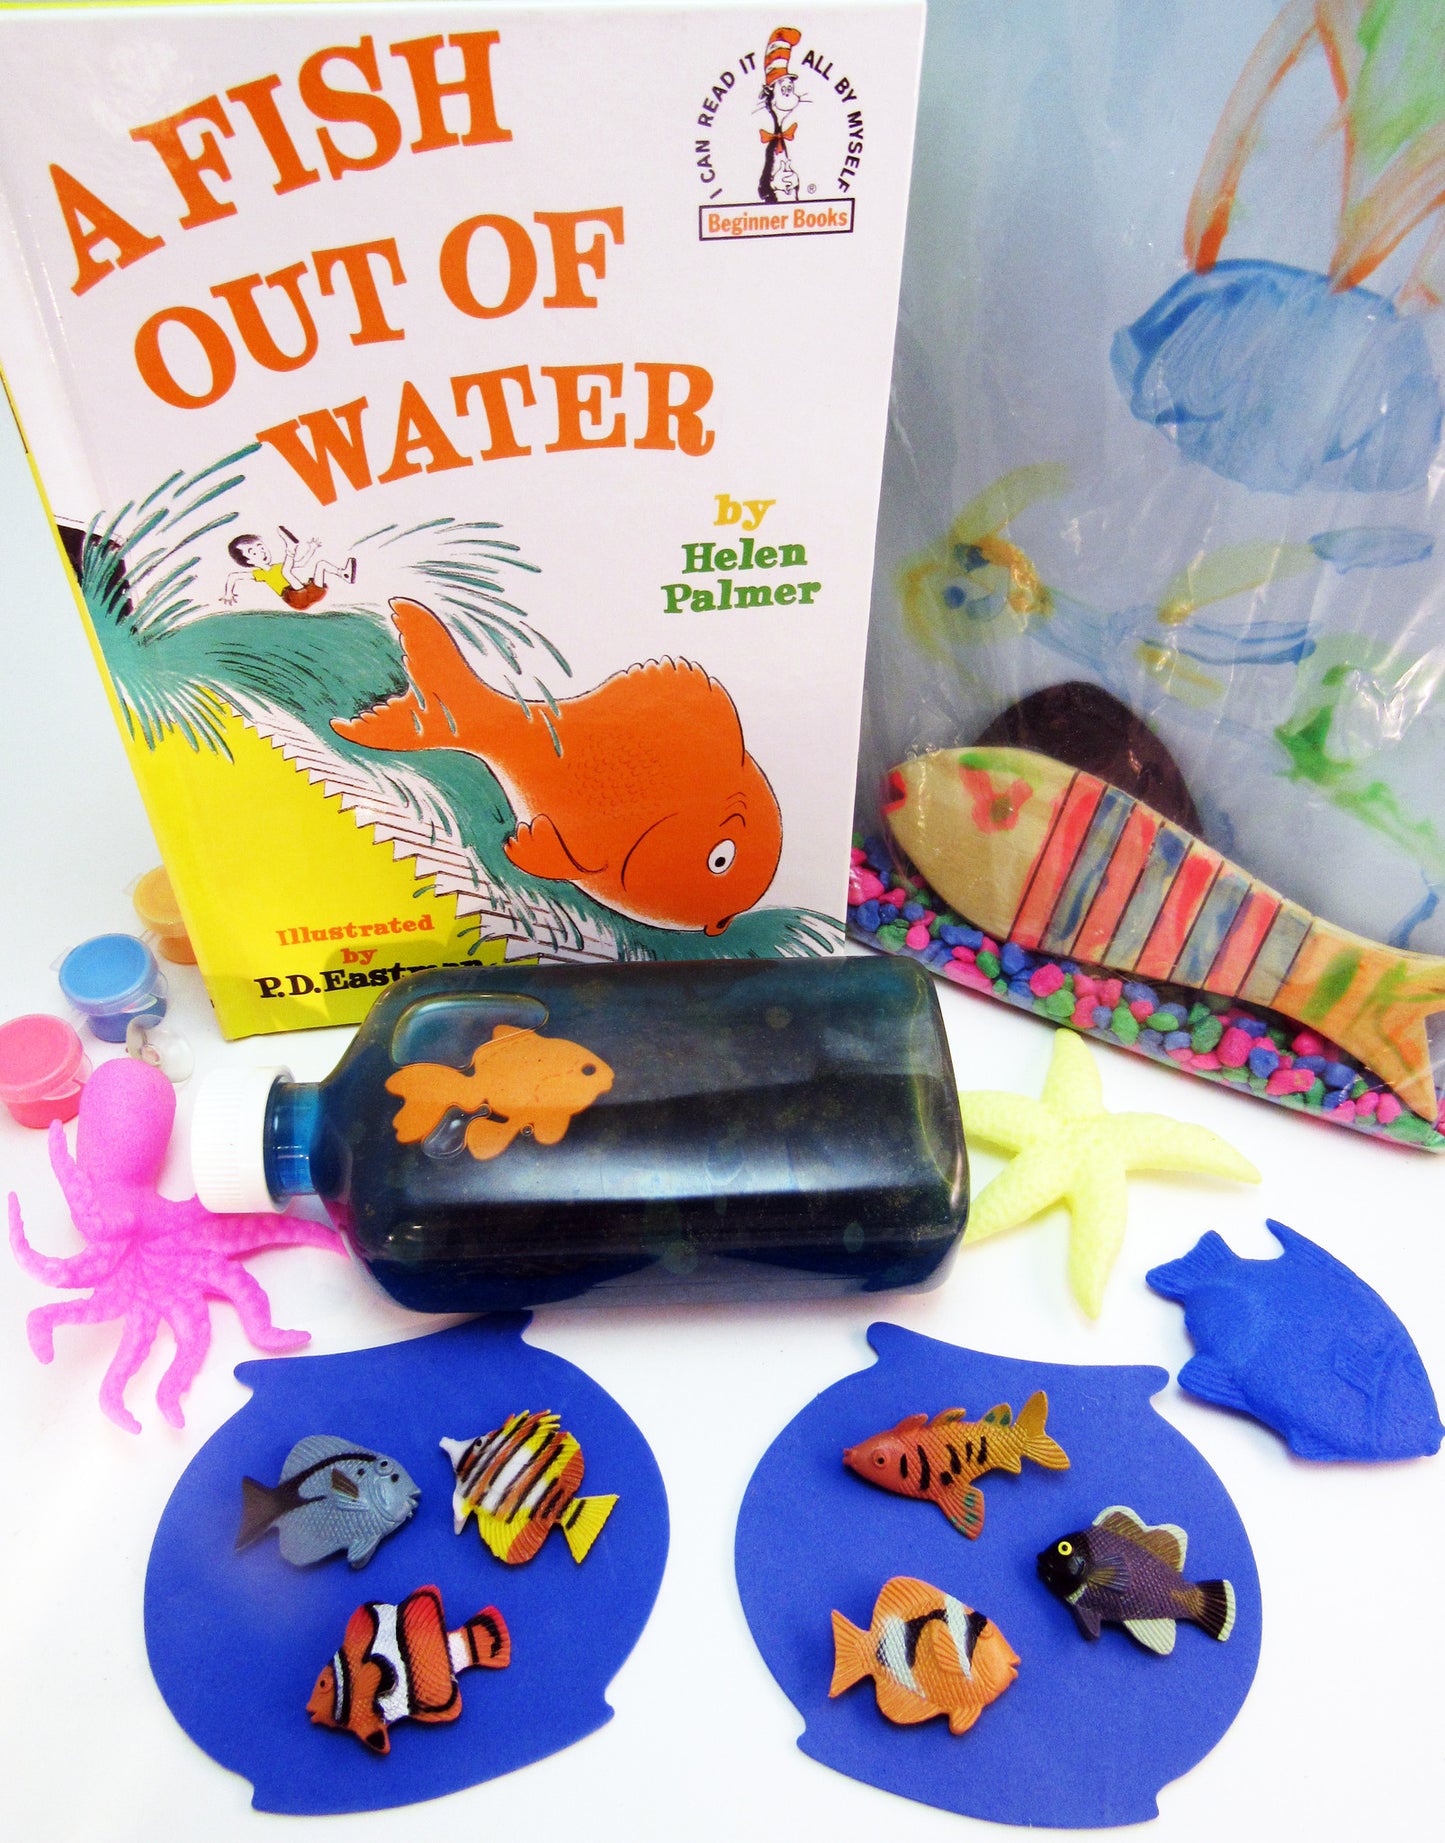 Ivy Kids kit containing math, literacy, science, and art activities based on A Fish Out of Water by Helen Palmer